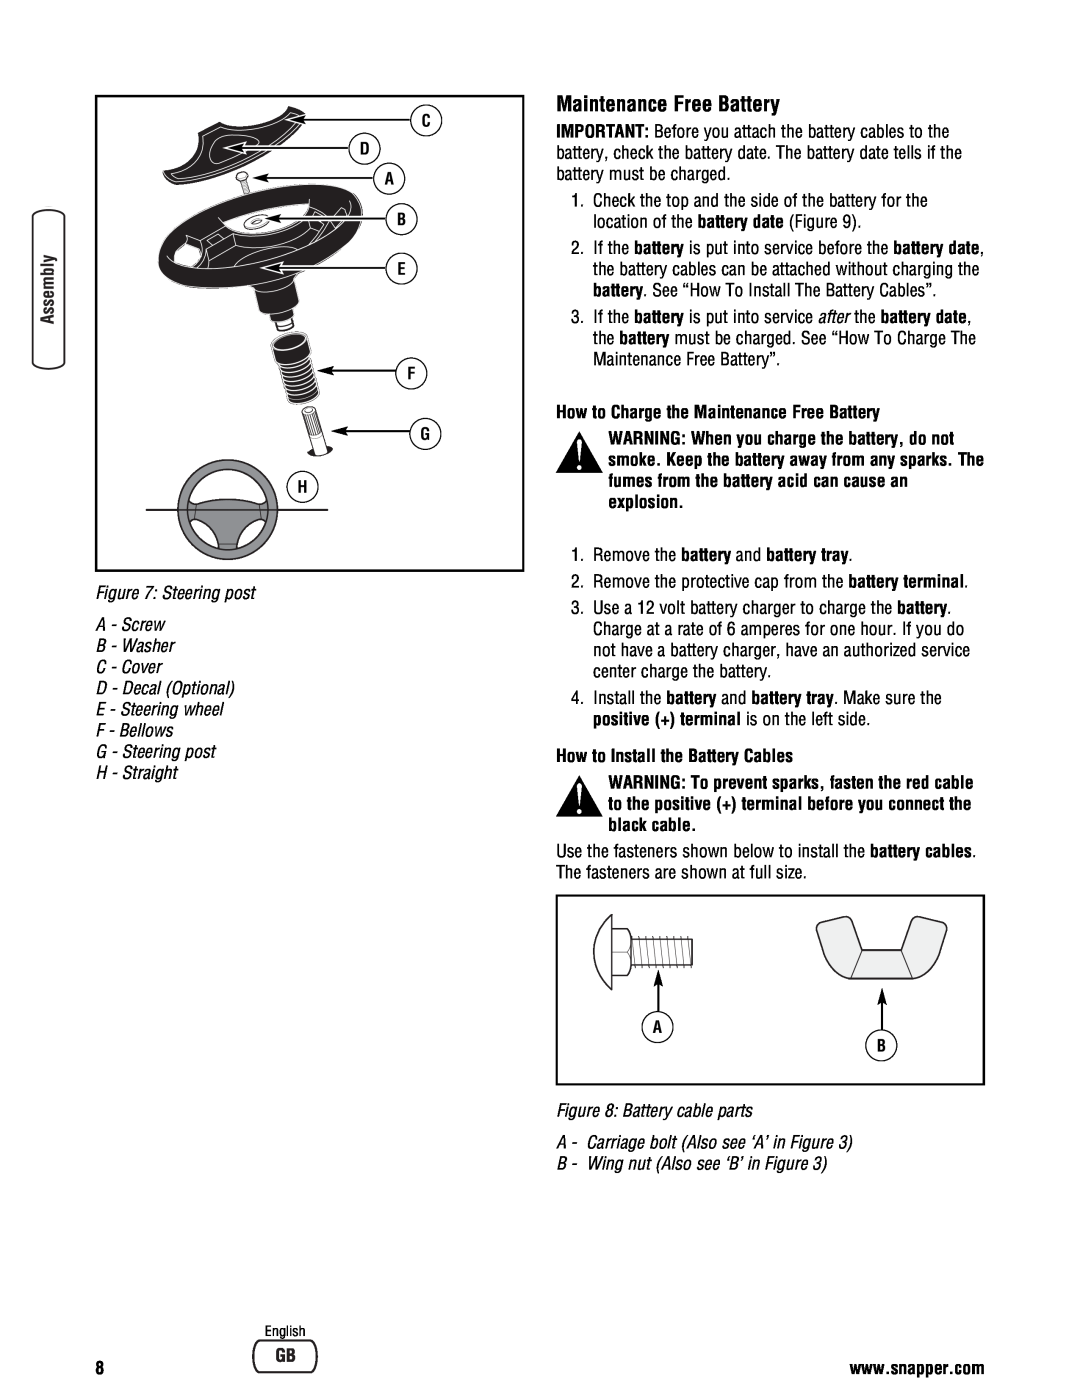 Snapper Steering post A - Screw B - Washer, C - Cover D - Decal Optional E - Steering wheel, Battery cable parts 